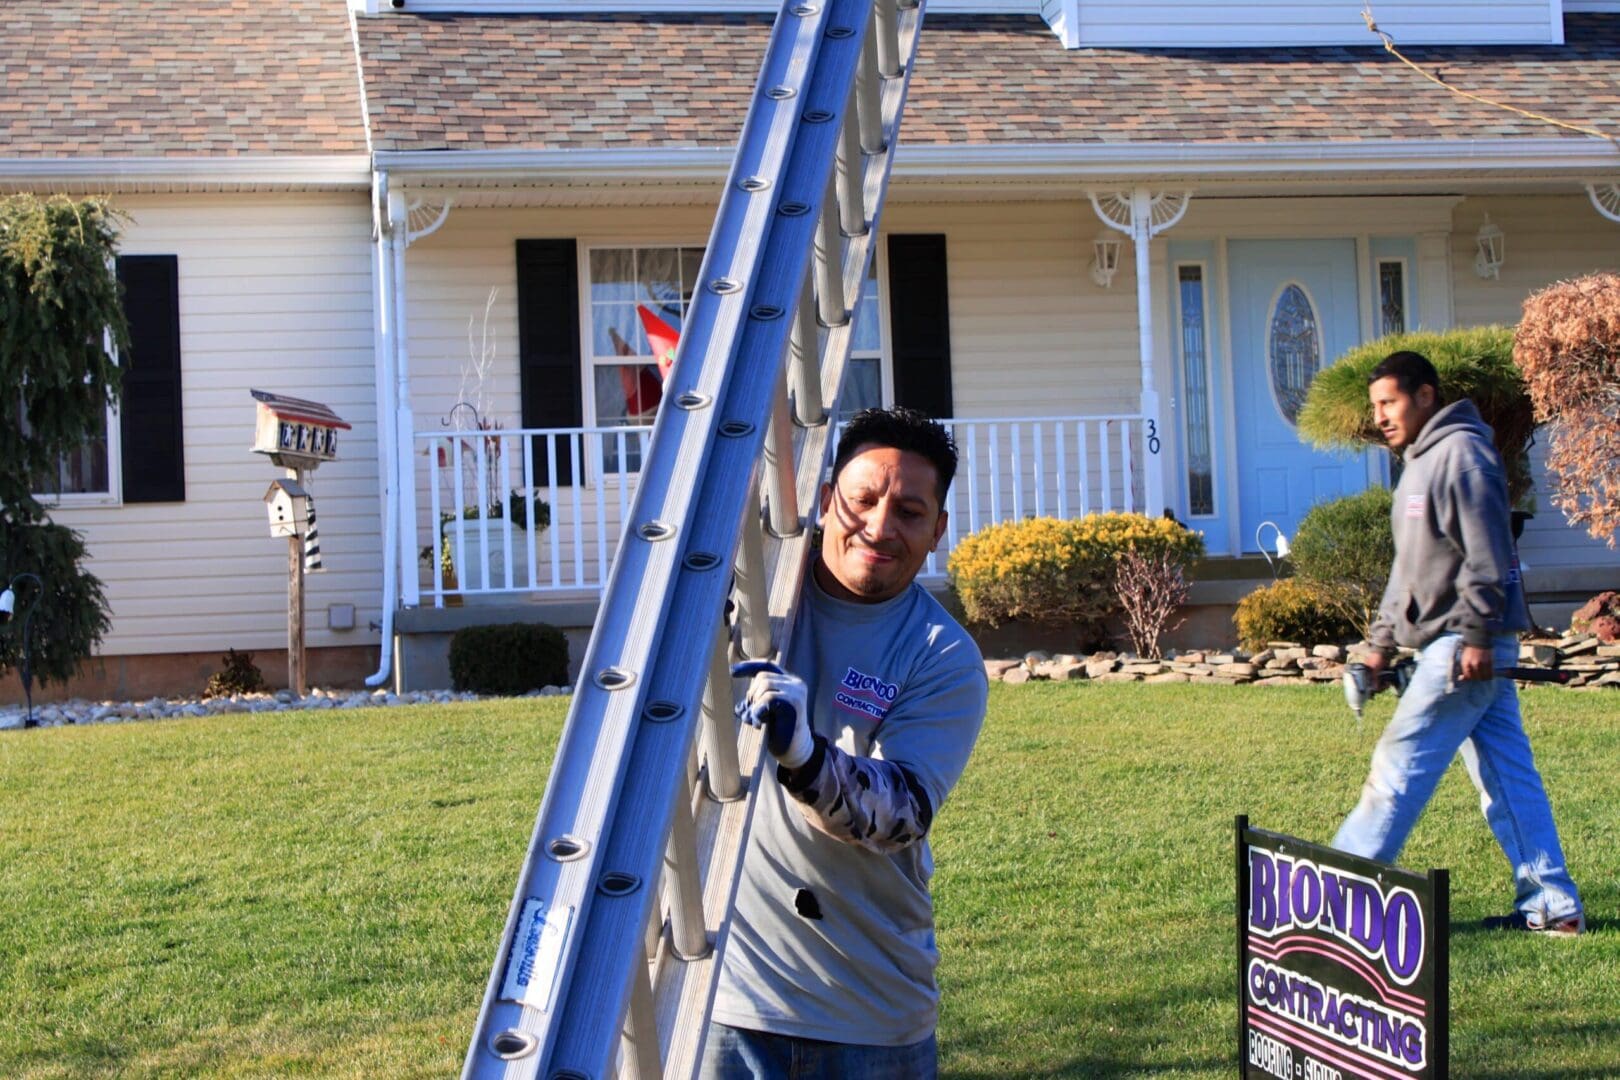 A man standing next to a ladder in front of a house.